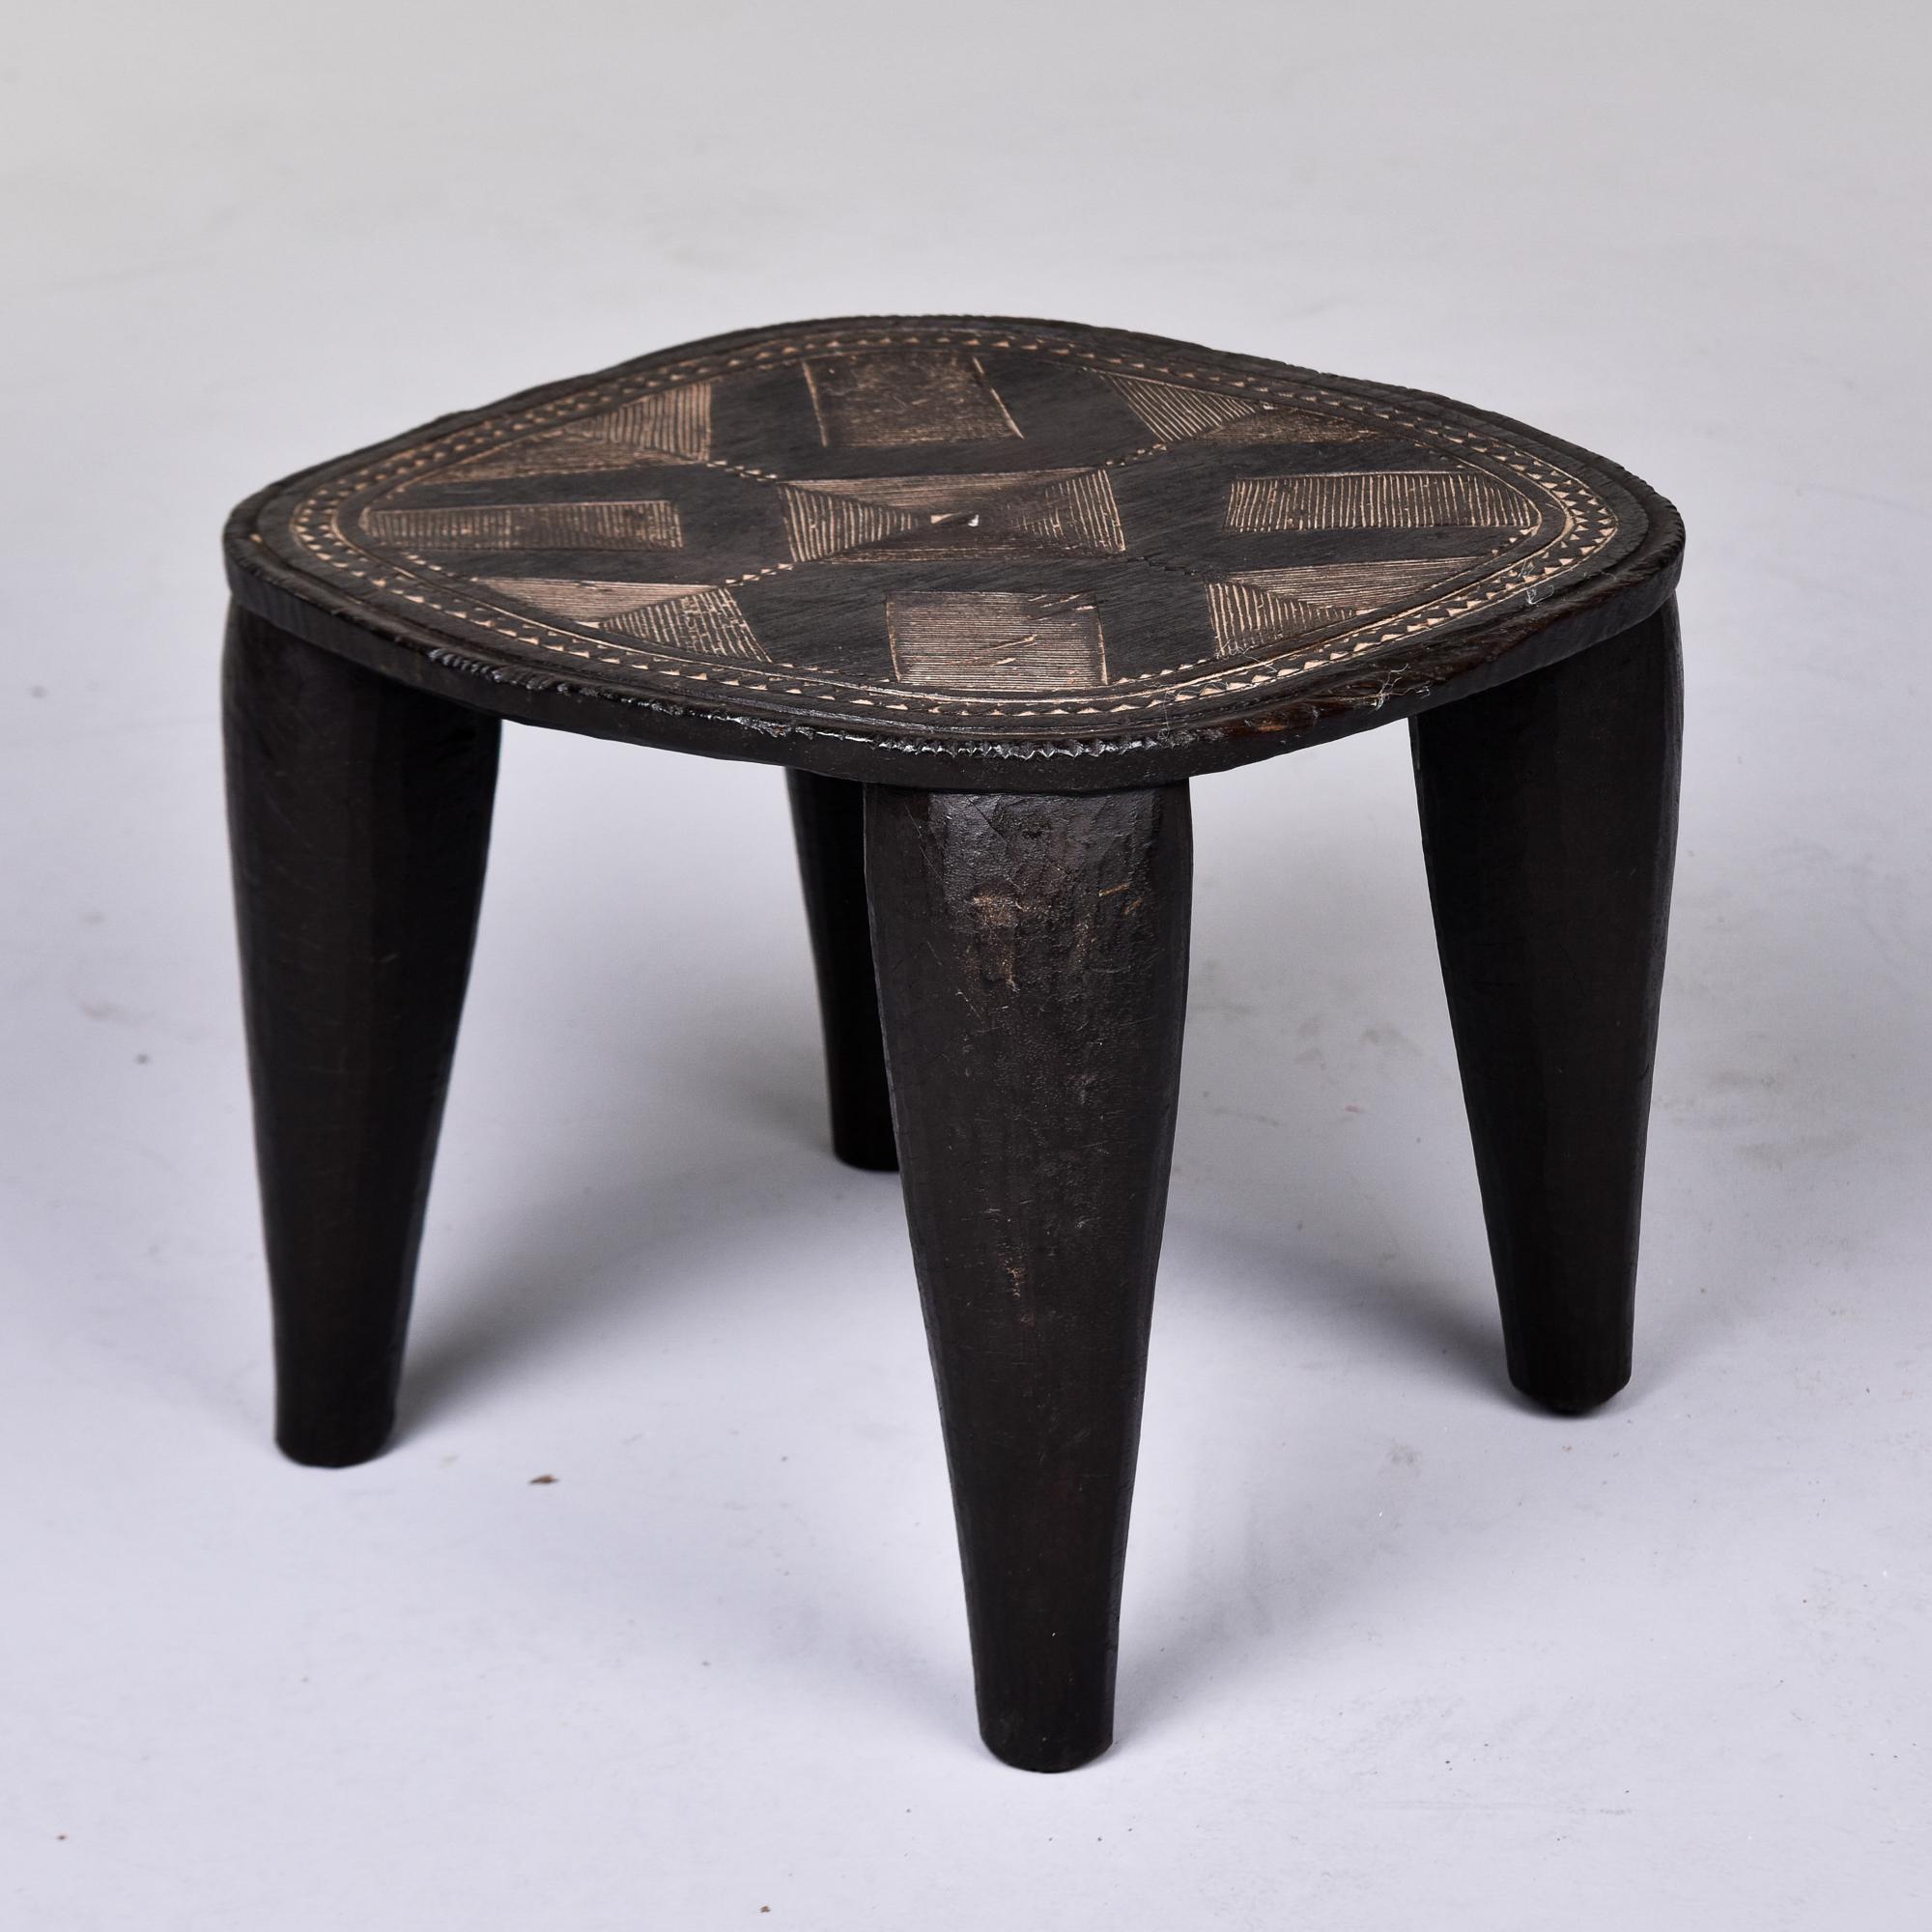 Nigerian Vintage Carved Small African Stool or Table by the Nupe of Nigeria 